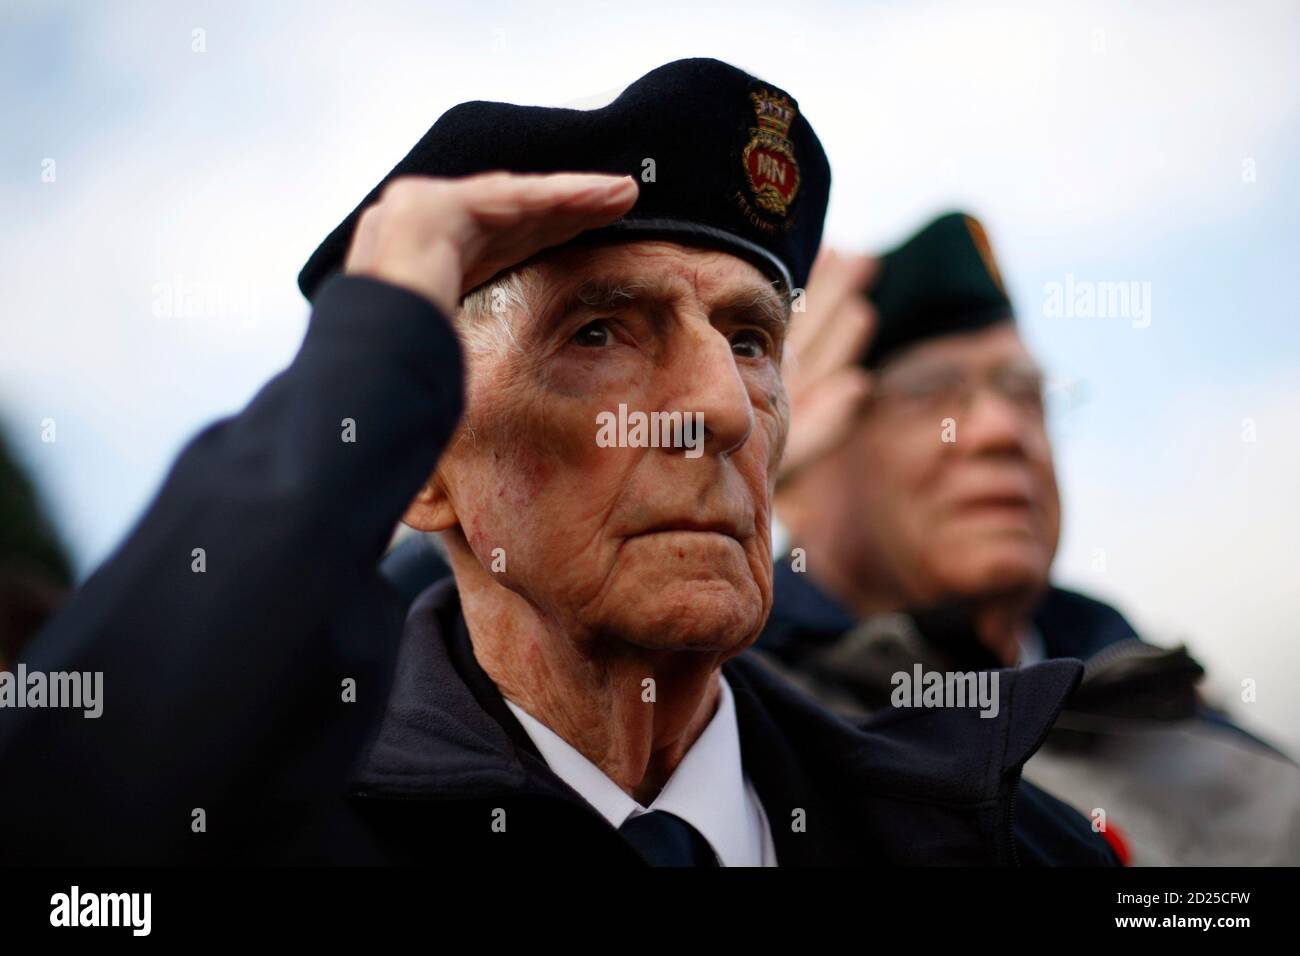 Canadian Second World War veterans Phil Etter (L) and Bill Story salute during a Remembrance Ceremony at the Mons Cemetery in Mons, Belgium November 11, 2008. A group of Canadian veterans is travelling through France and Belgium to commemorate the 90th anniversary of the end of the First World War.       REUTERS/Chris Wattie       (BELGIUM) Stock Photo